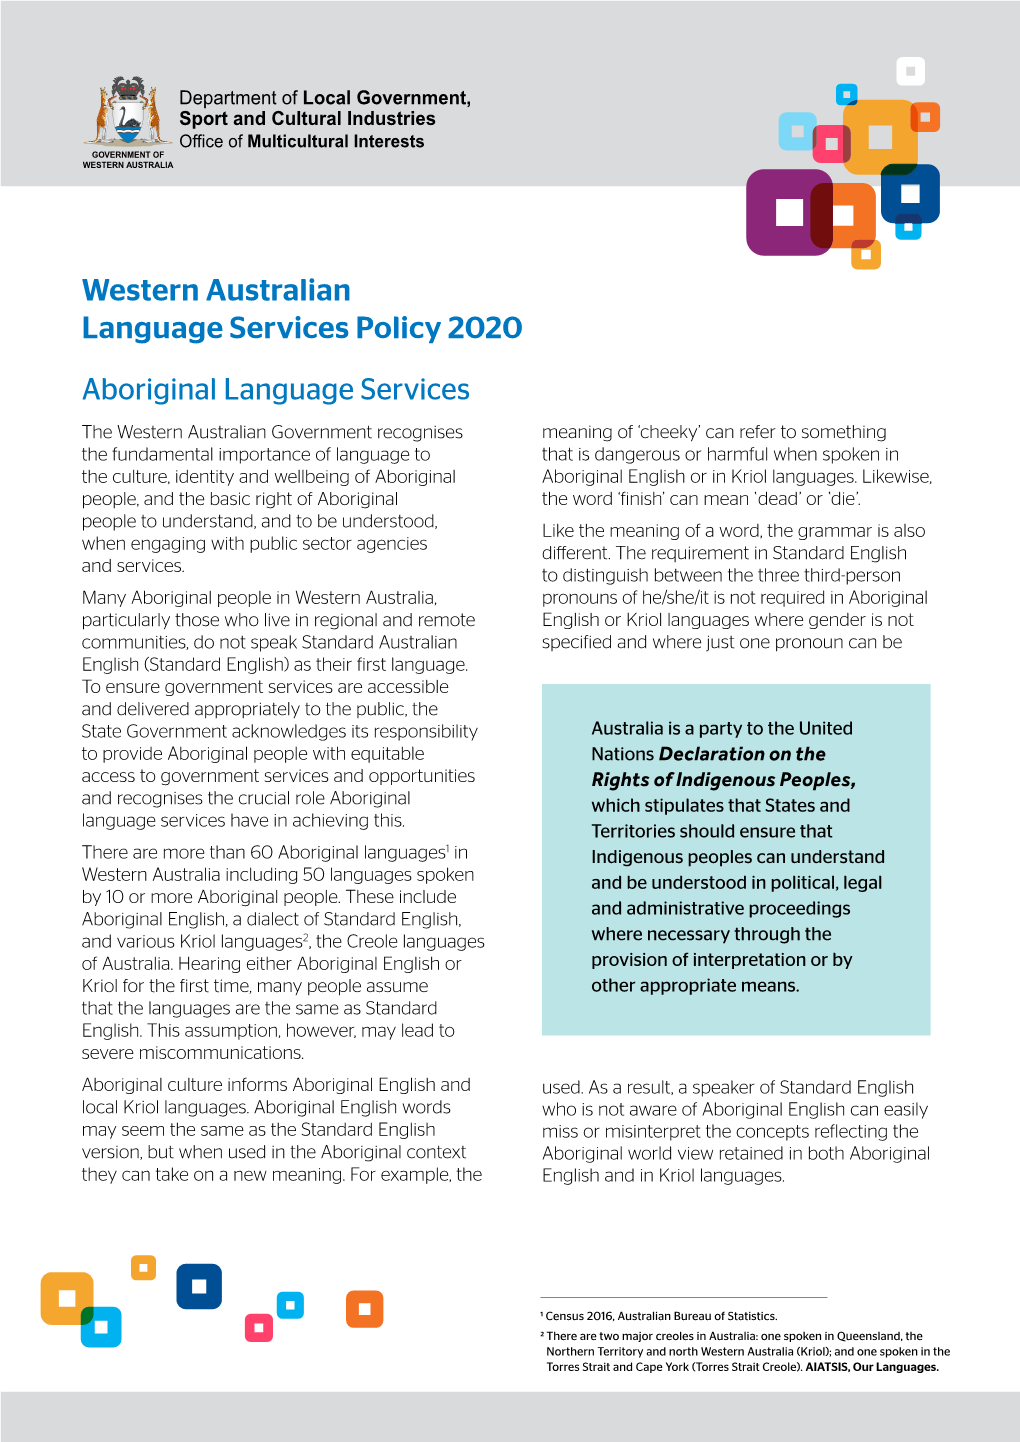 Western Australian Language Services Policy 2020